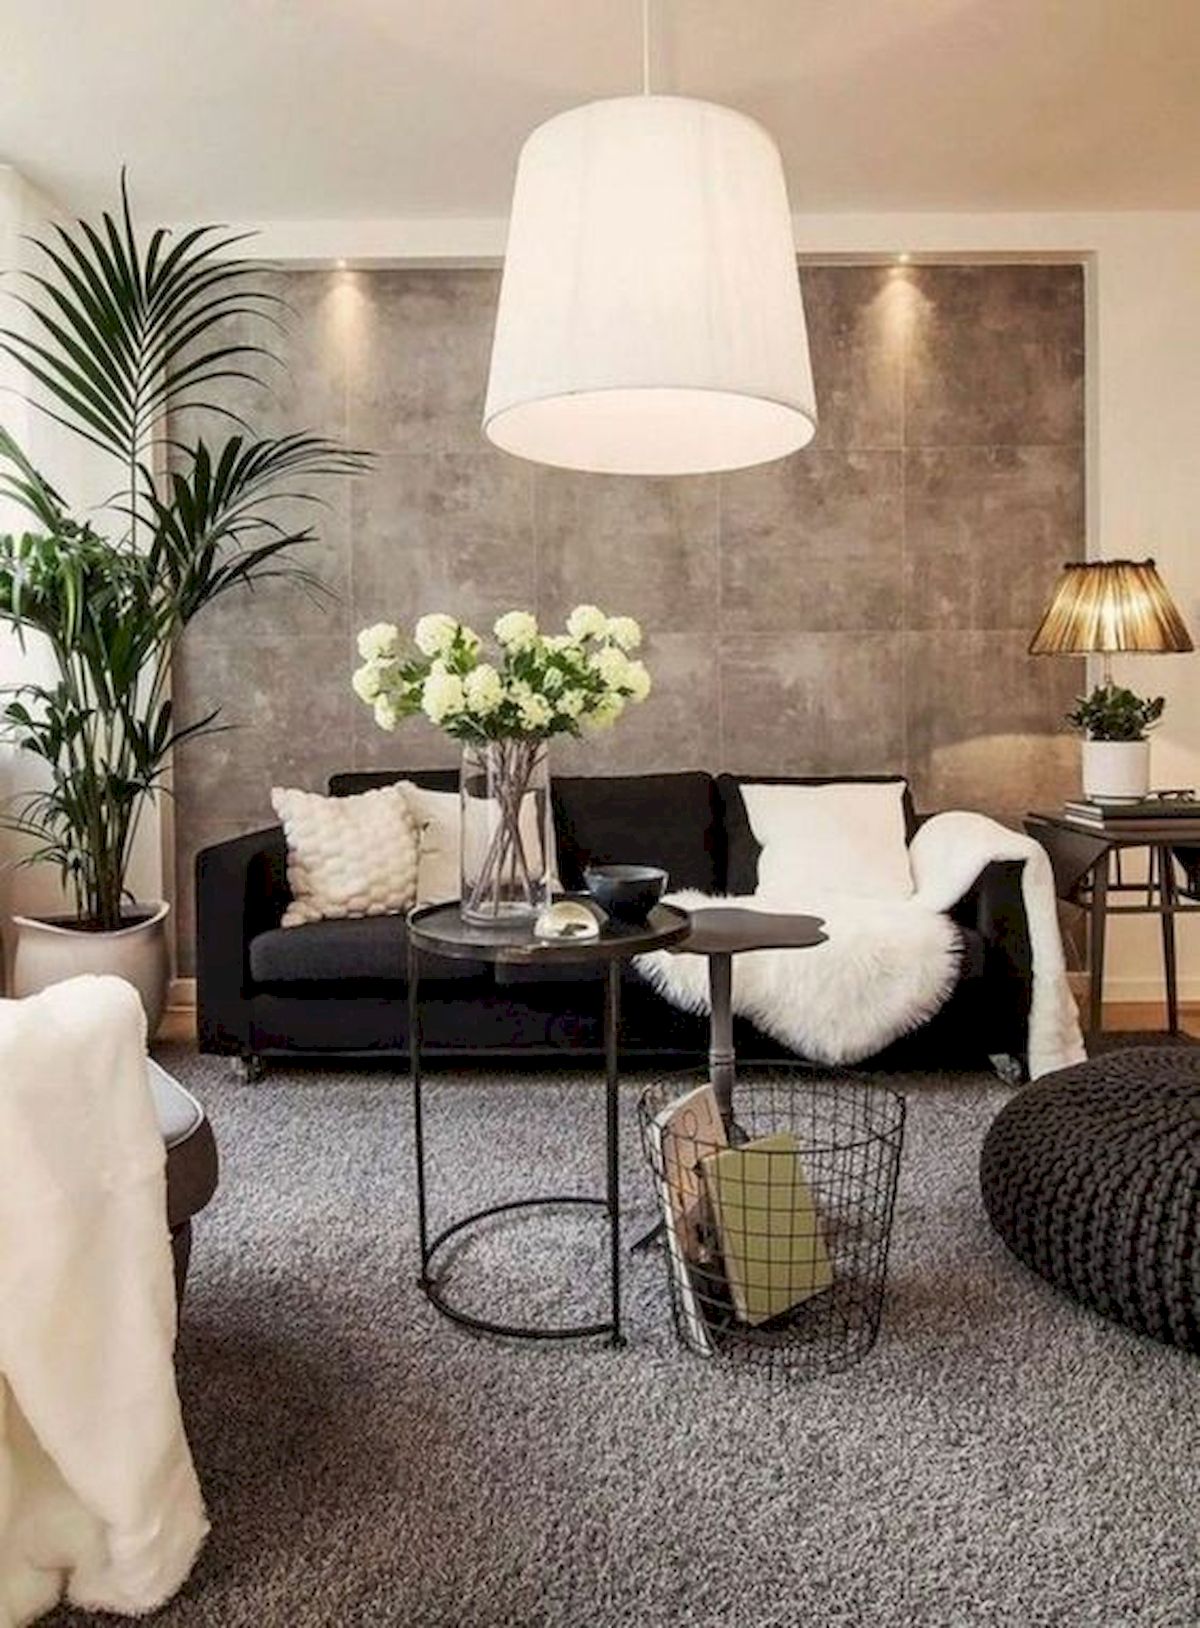 36 Elegant Living Room Design and Decor Ideas That You Will Love (12)